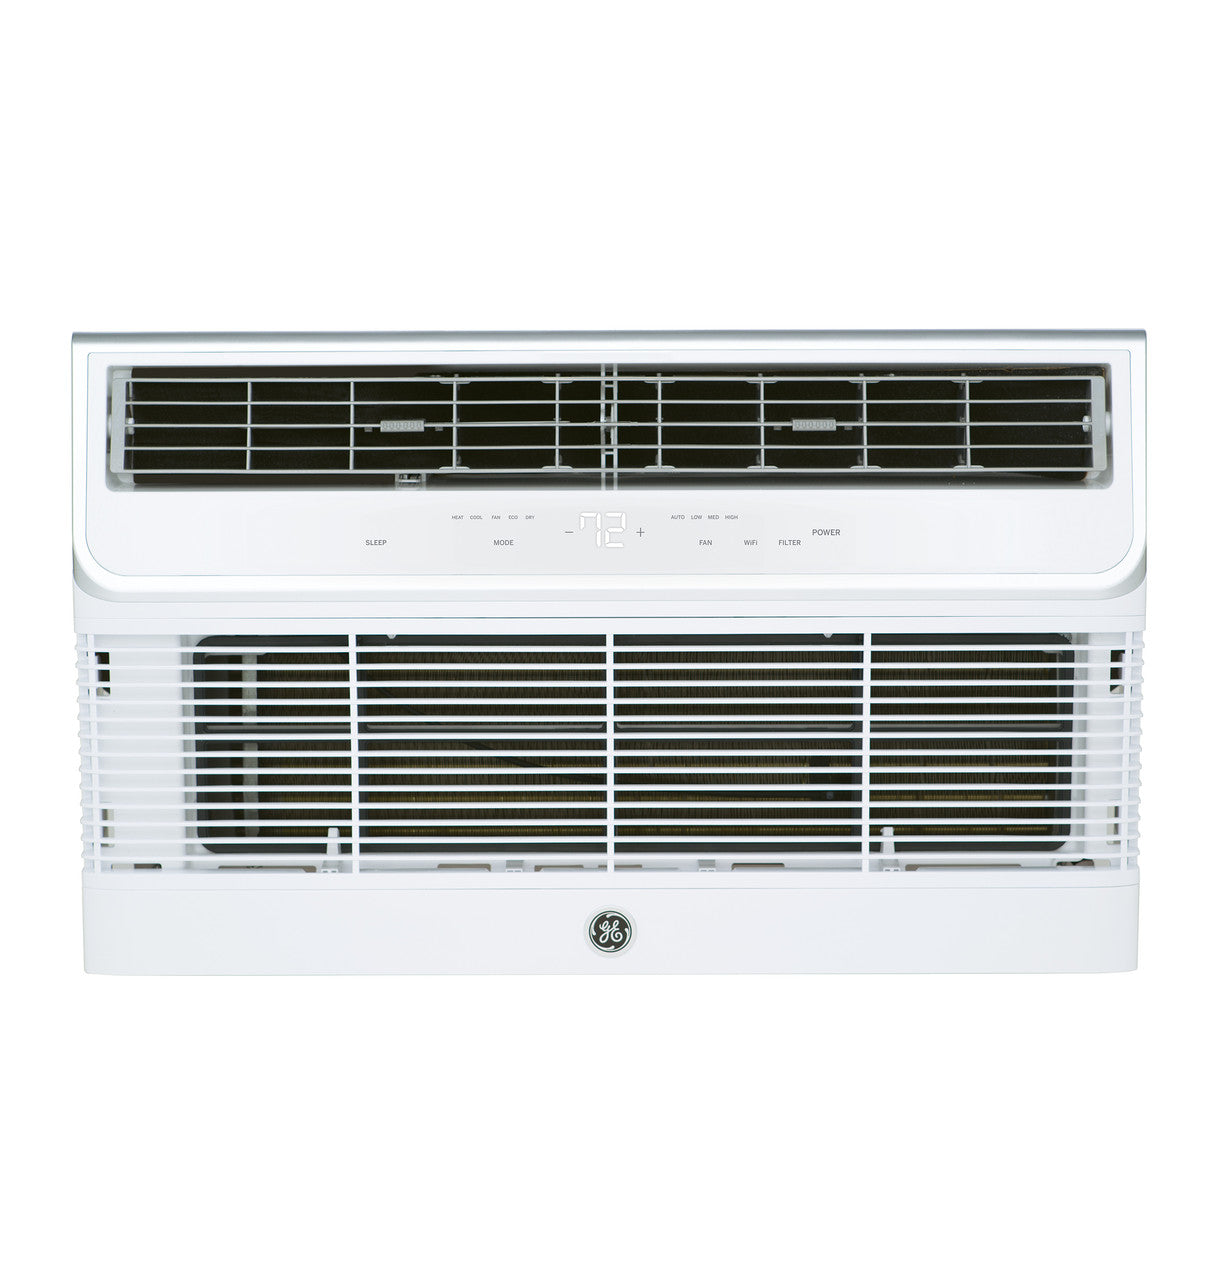 GE 10,000 BTU 208/230 Volt Through-the-Wall Air Conditioner with Electric Heat - AJEQ10DWJ